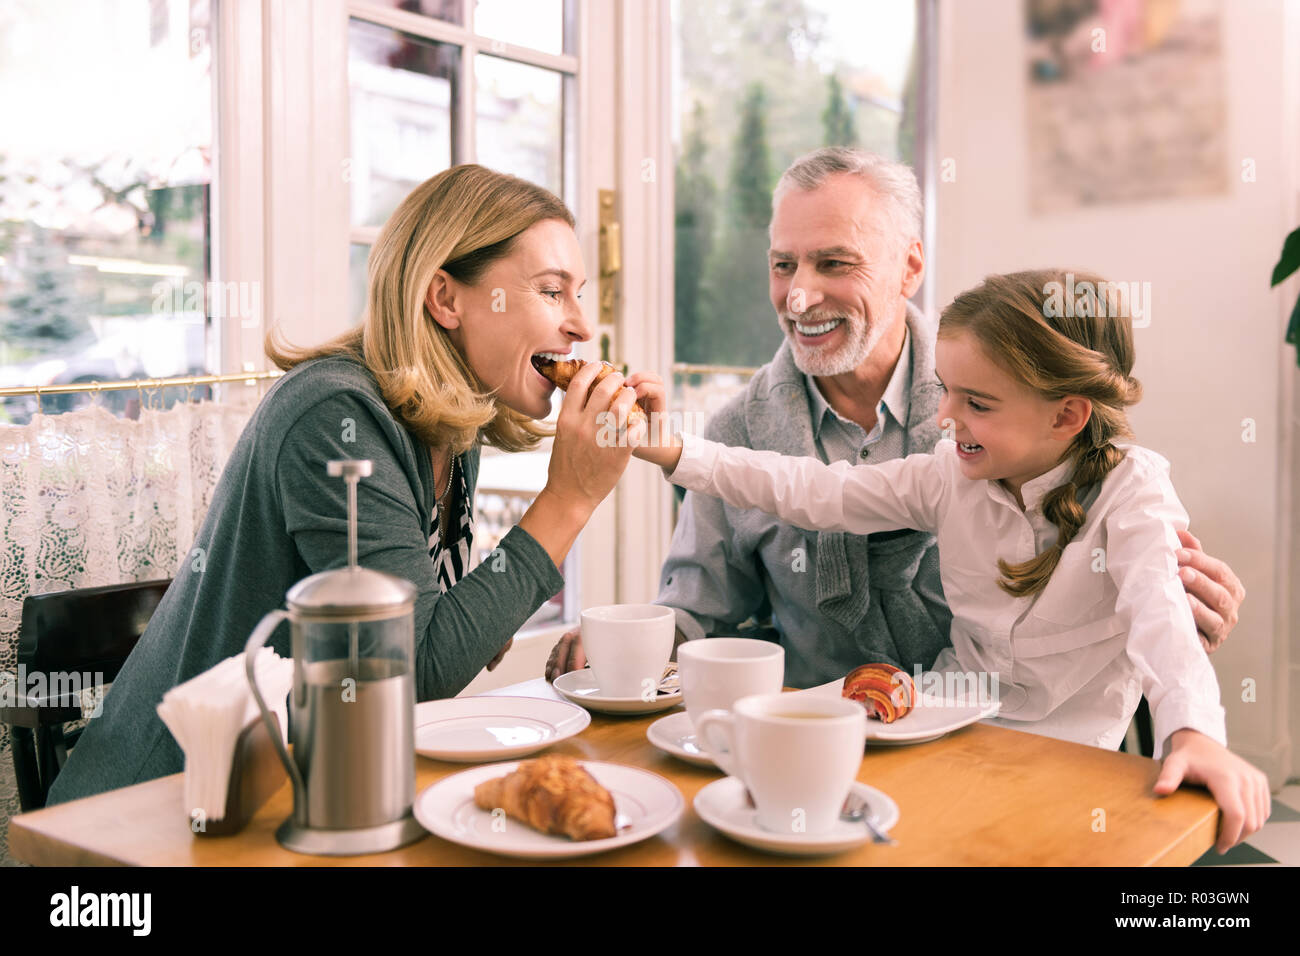 Cute kind-hearted granddaughter sharing her croissant with grandmother Stock Photo